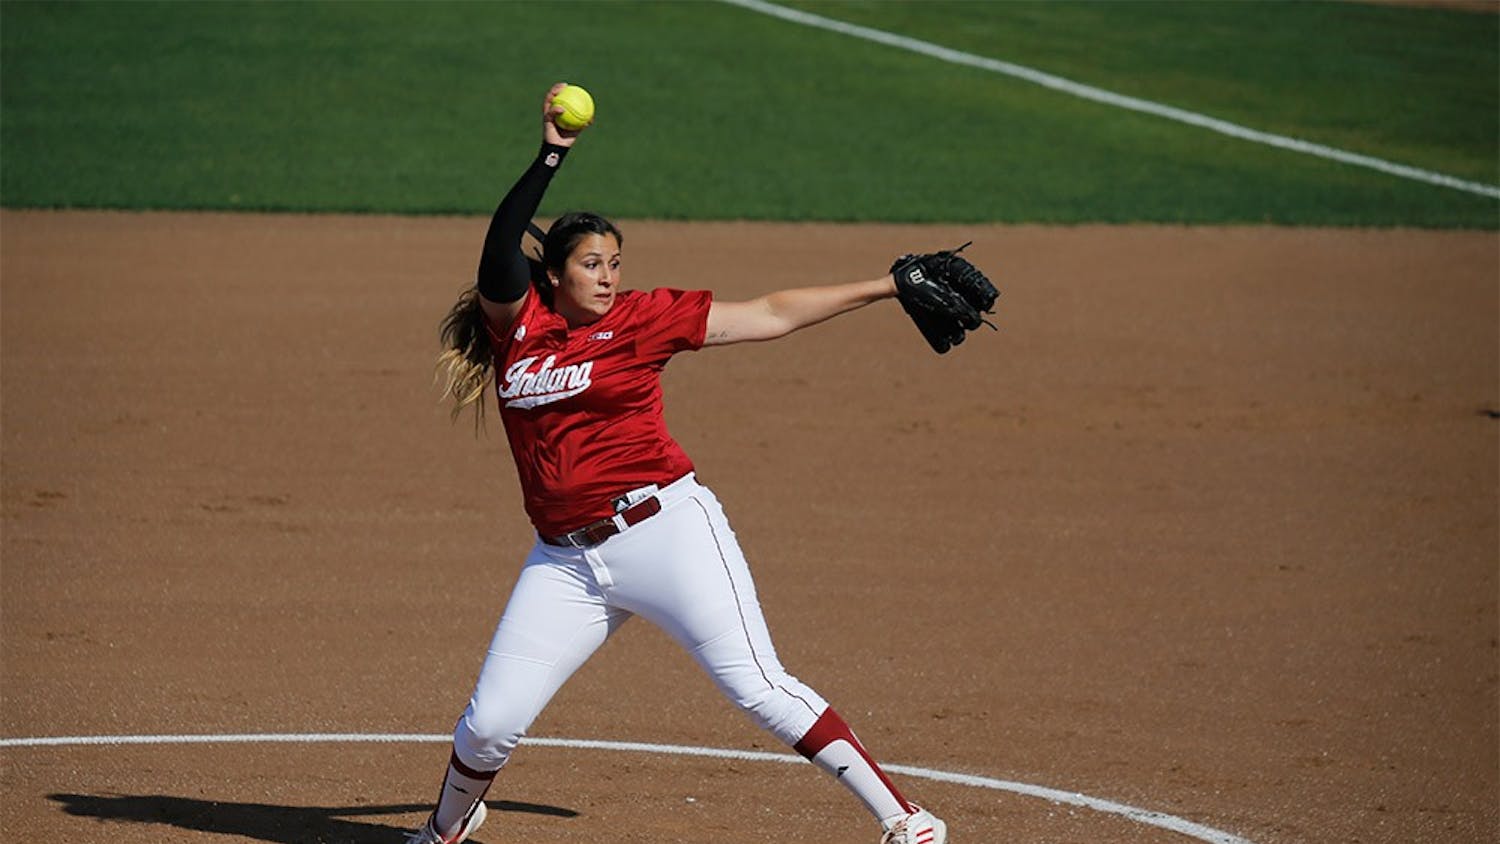 Senior Pitcher Miranda Tamayo winds up for a pitch during IU's first game against Purdue April 22, 2015 at Andy Mohr Field. IU won 6-3 after freshman Mena Fulton hit a 3-run home run during the last inning of the game.